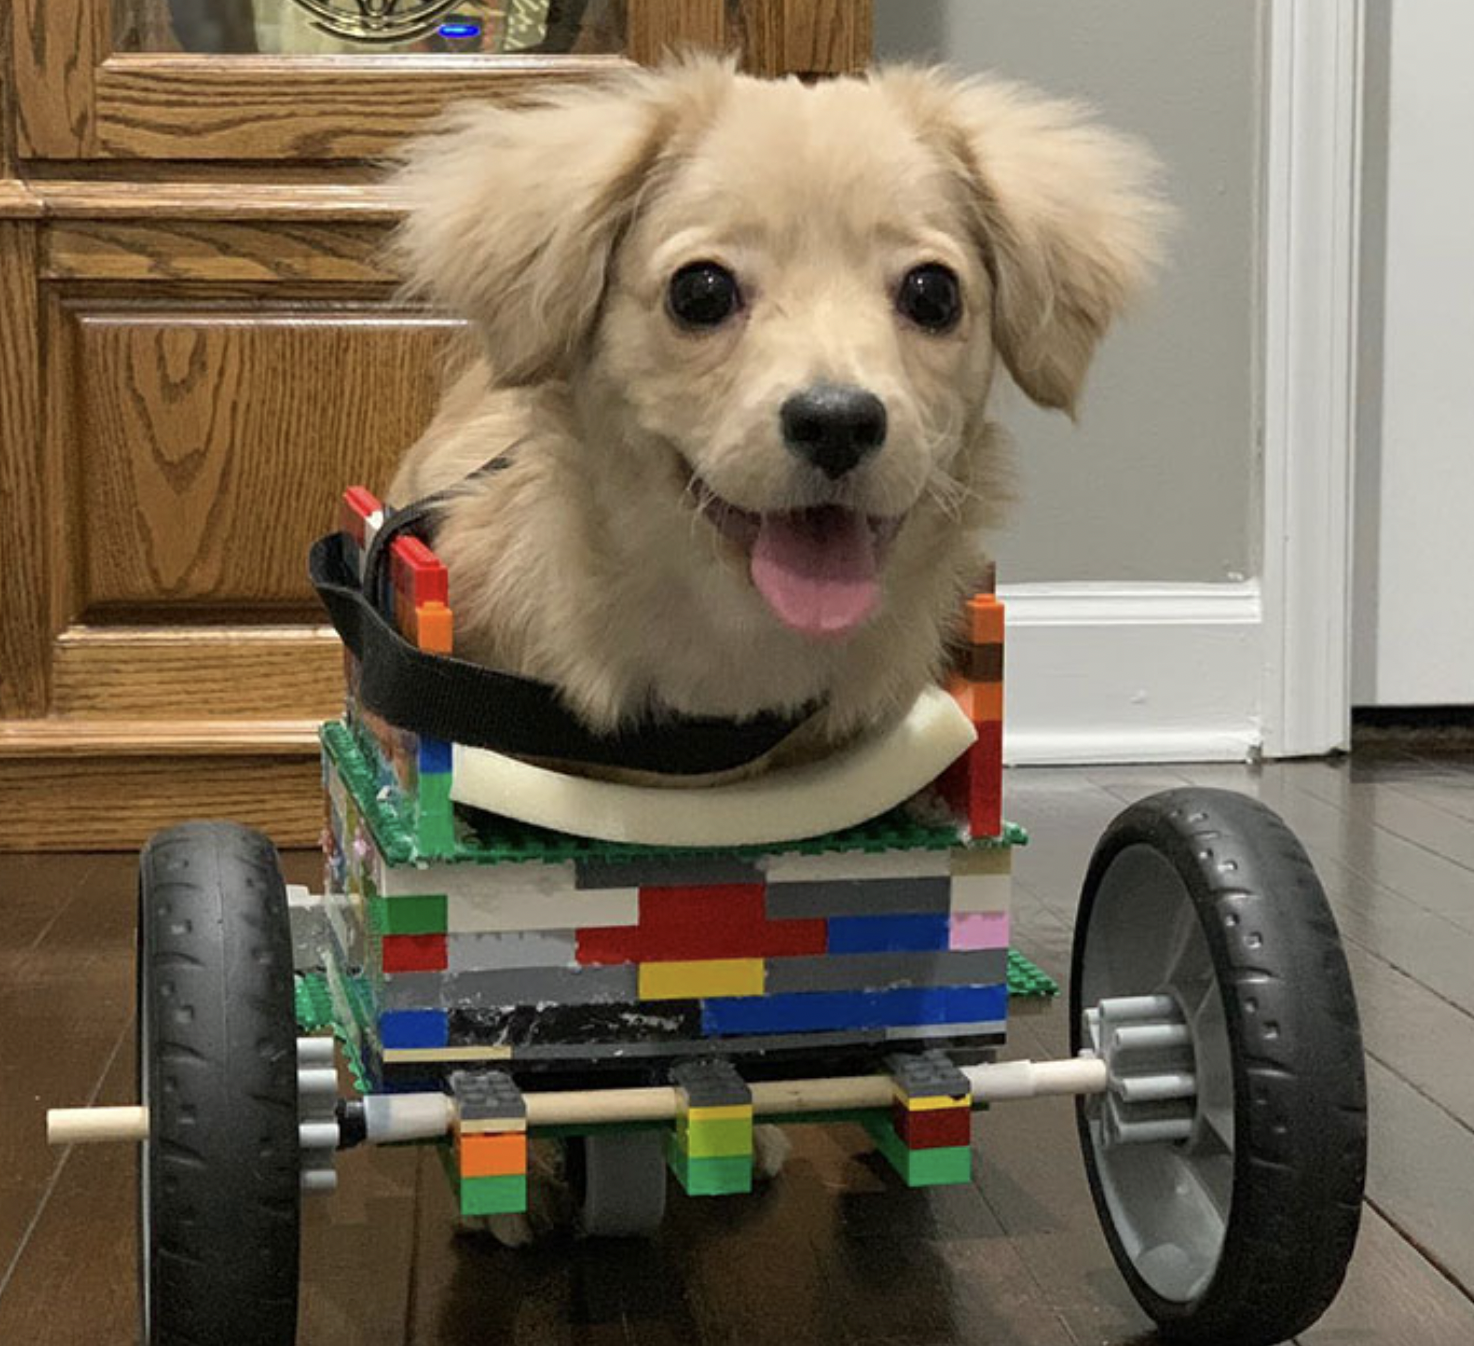 A 12-year-old kid builds a wheelchair from LEGO for an unwanted puppy so that it can enjoy life 4